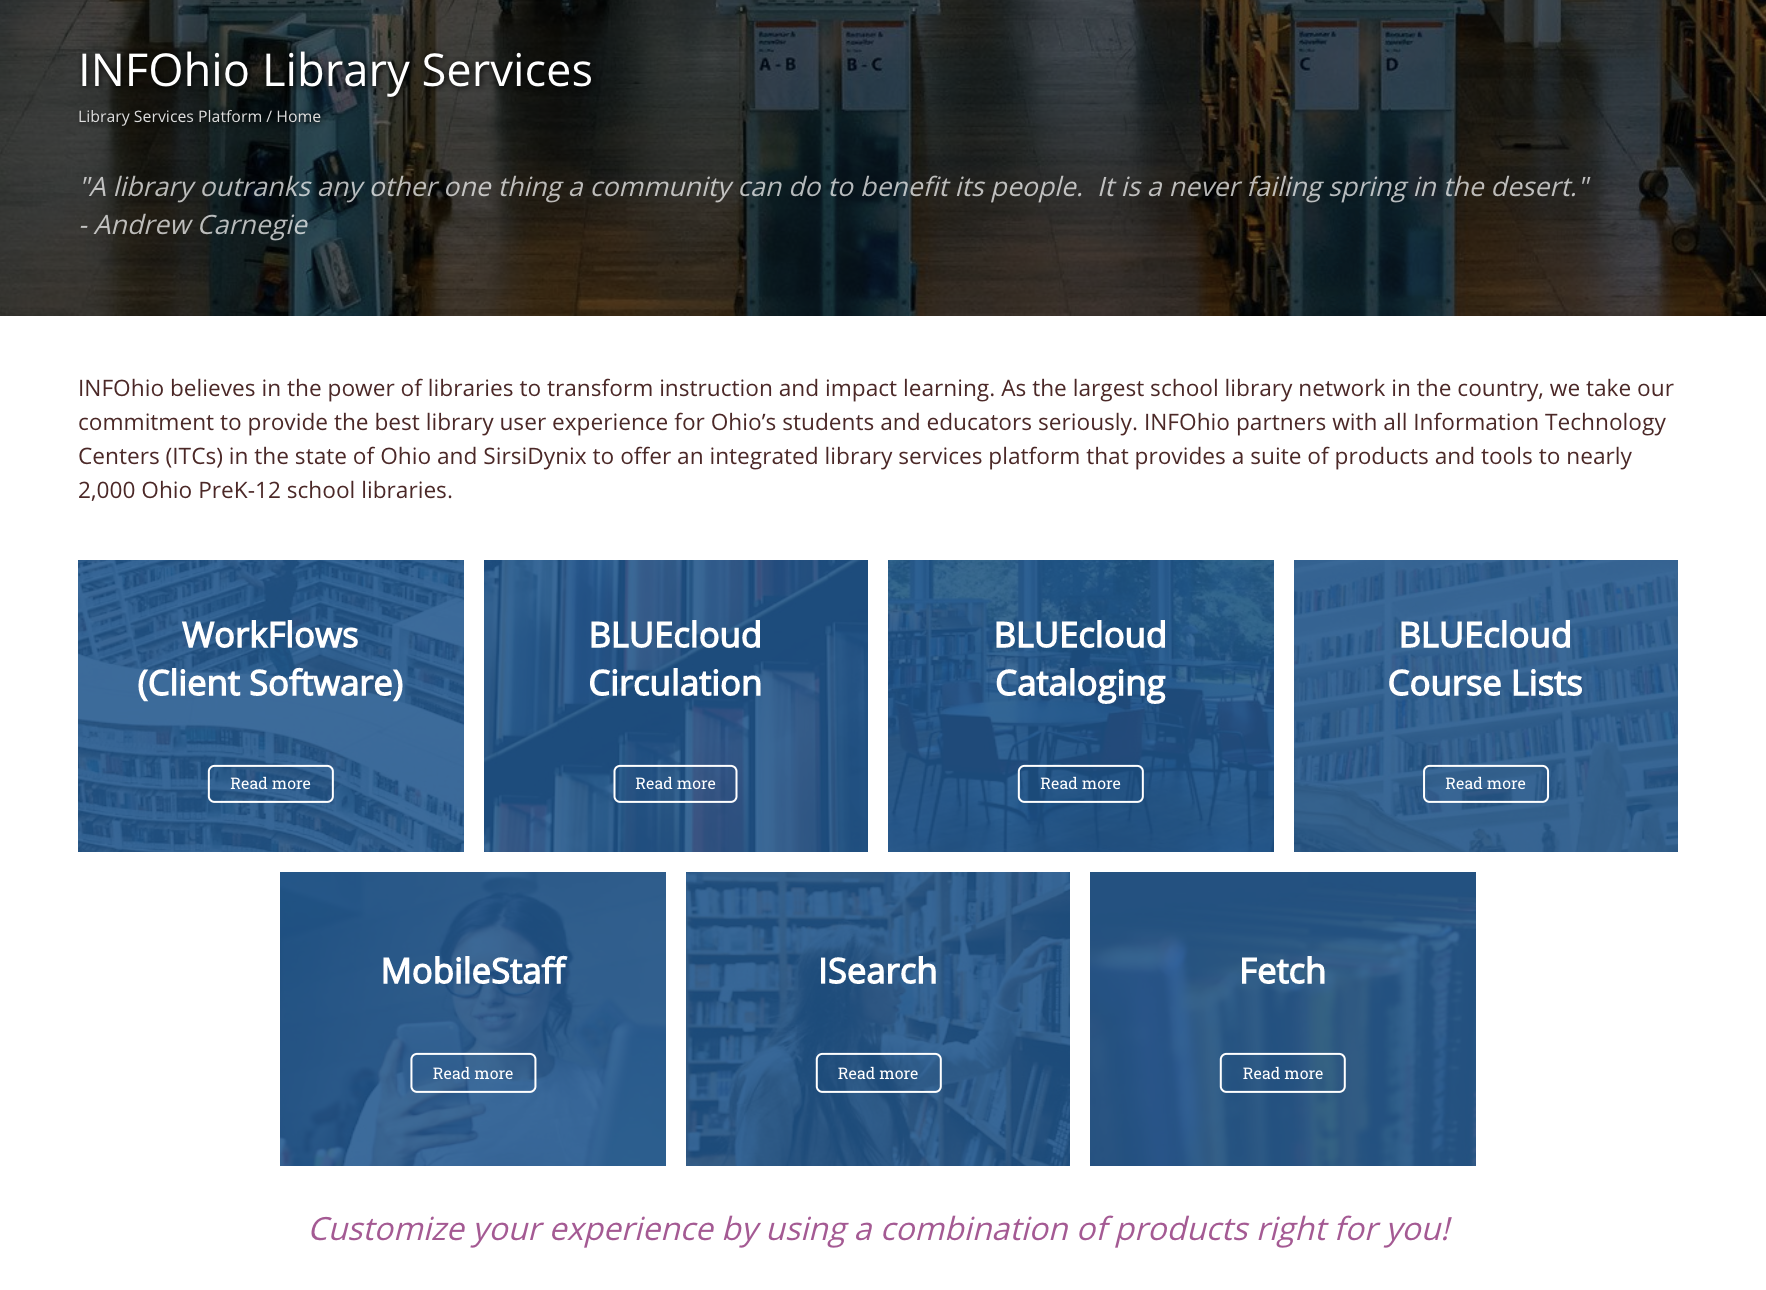 INFOhio's Library Services Platform: Web Pages Reimagined